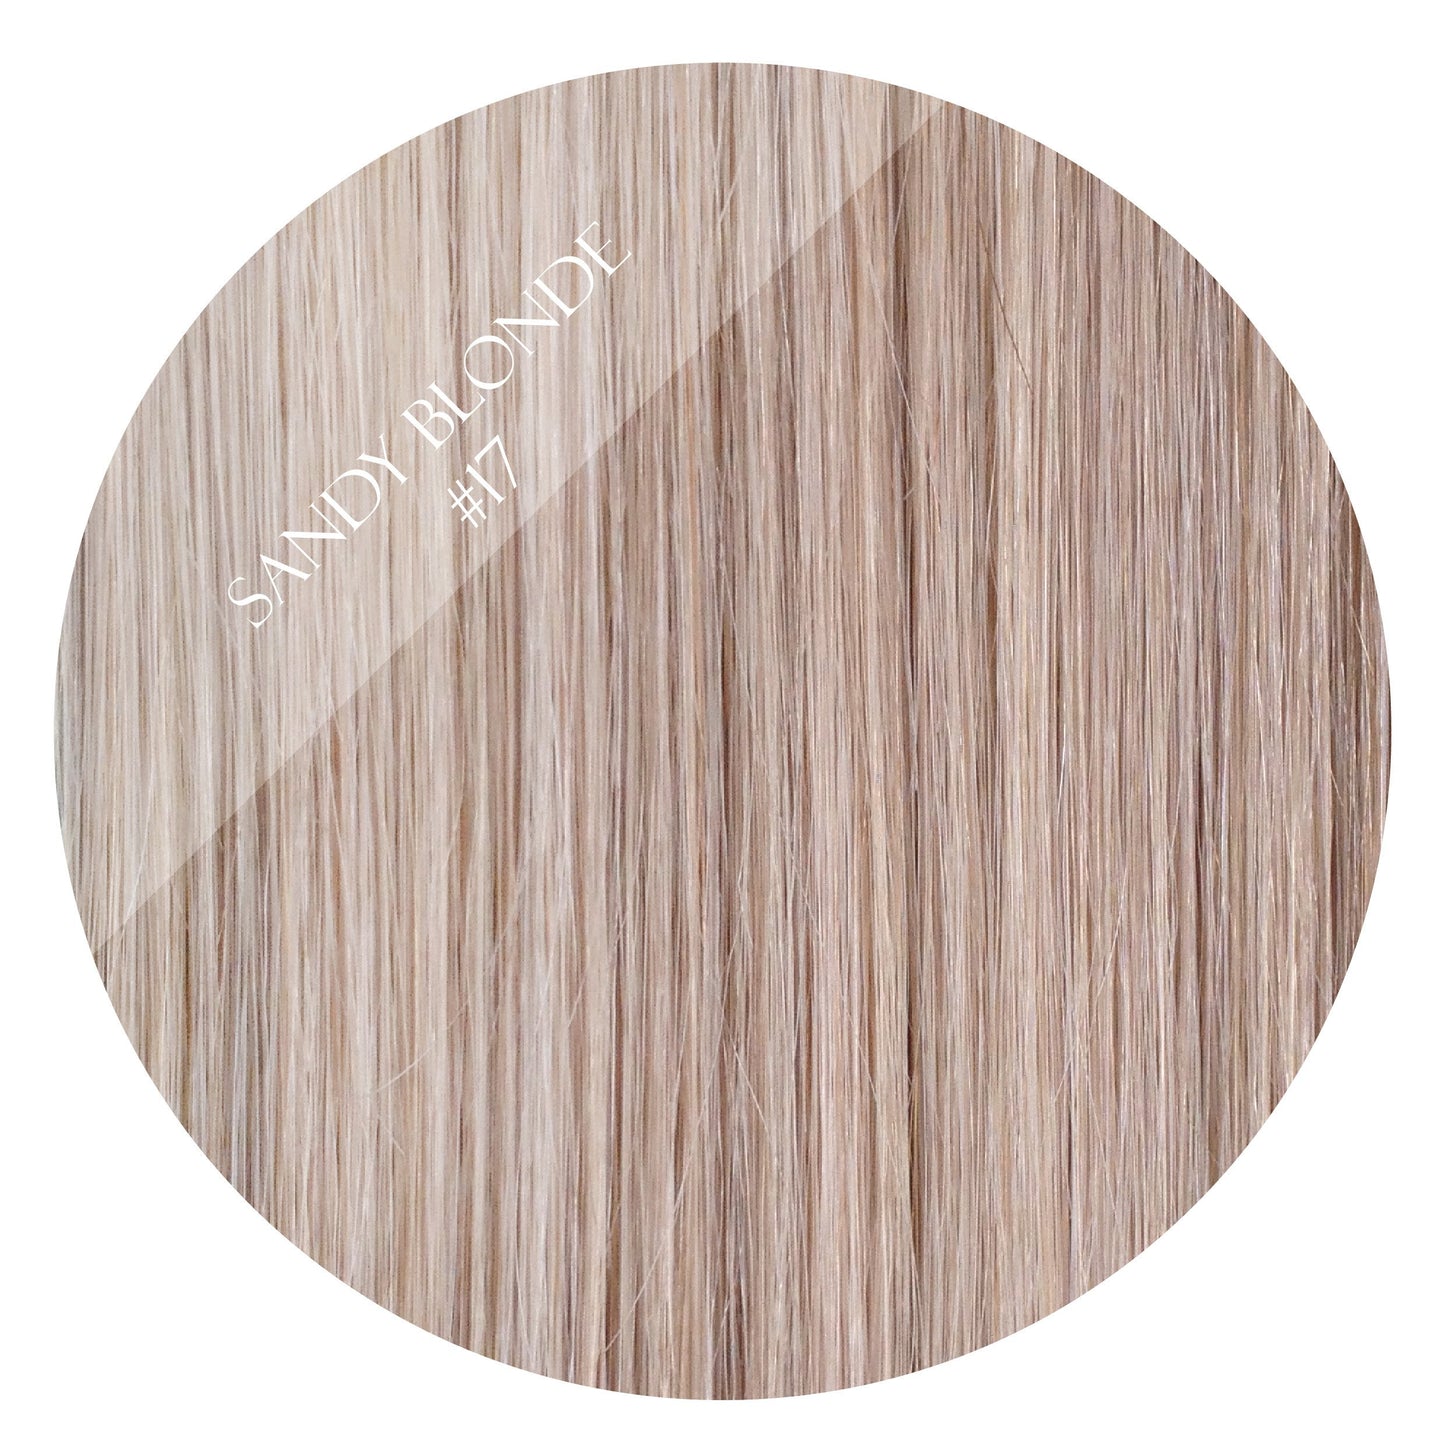 latte blonde #17 weft hair extensions 26inch deluxe